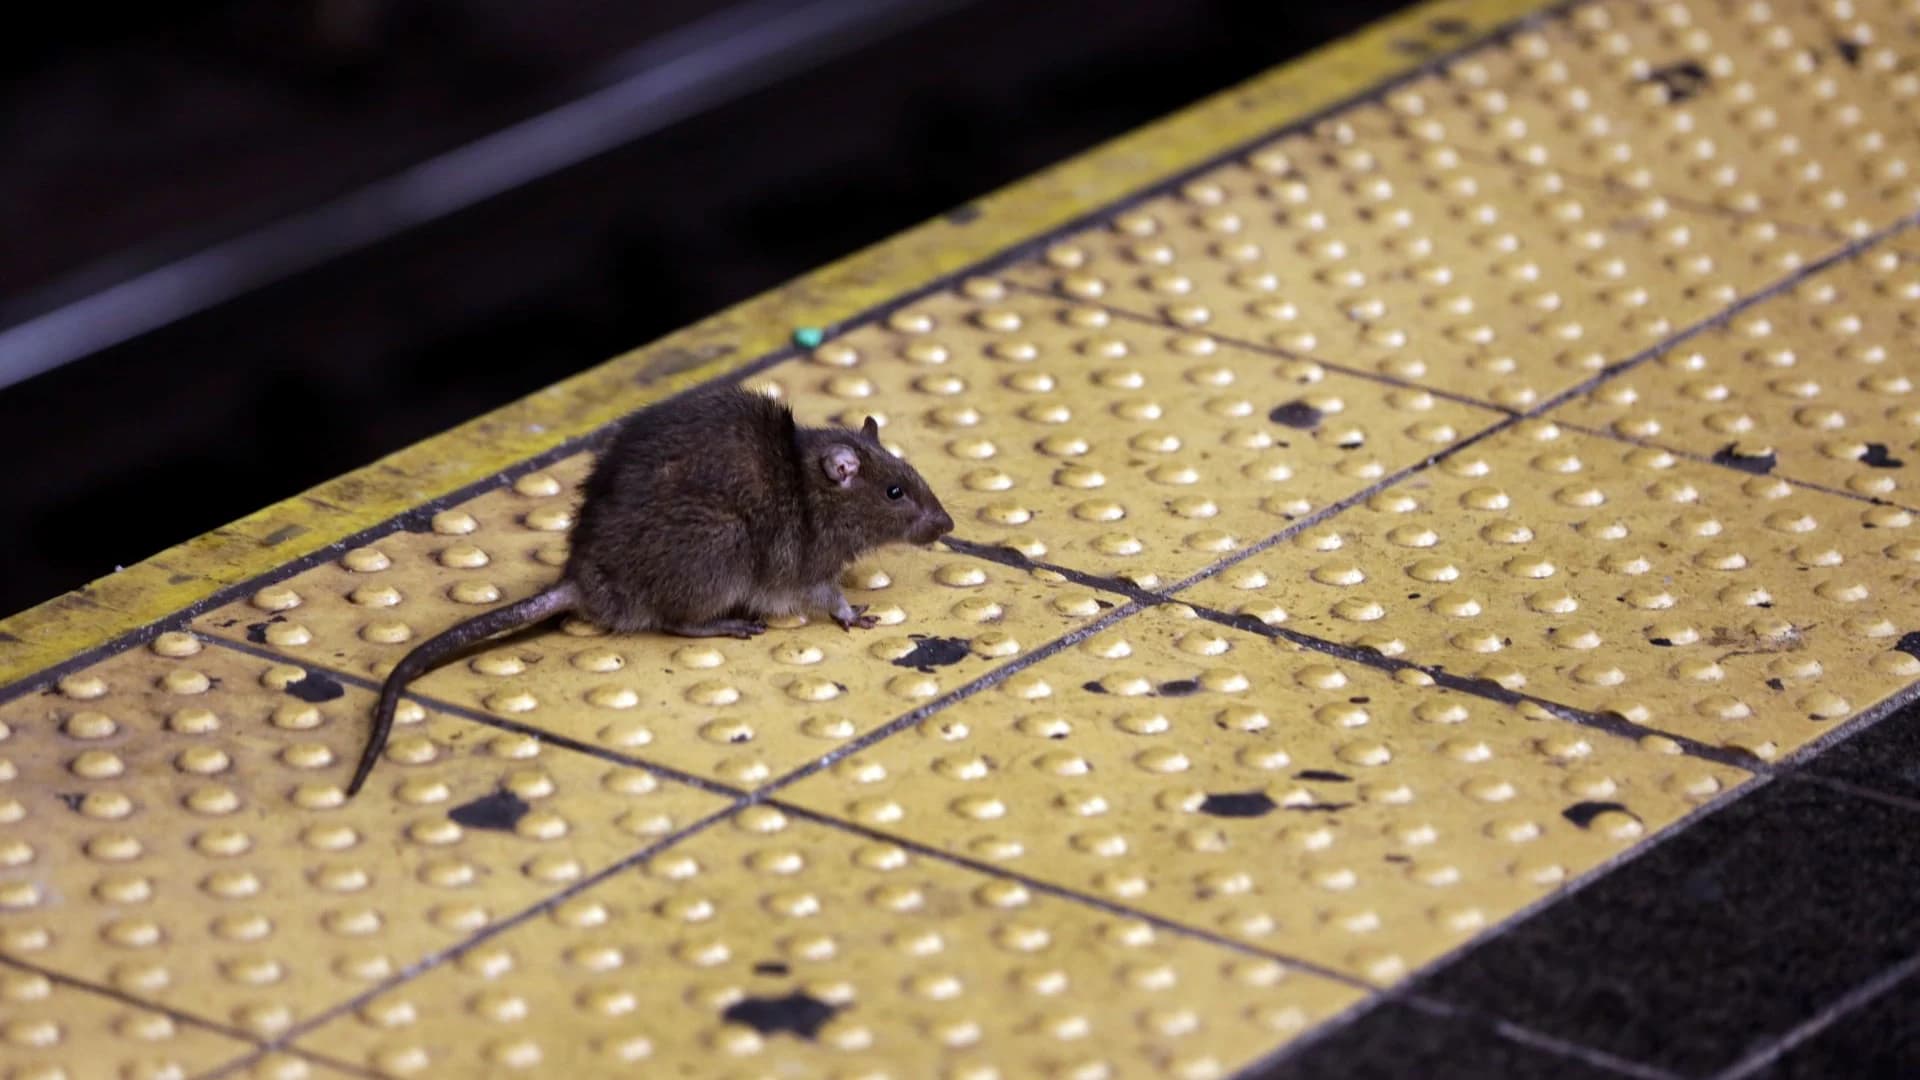 Oh, rats! As New Yorkers emerge from pandemic, so do rodents